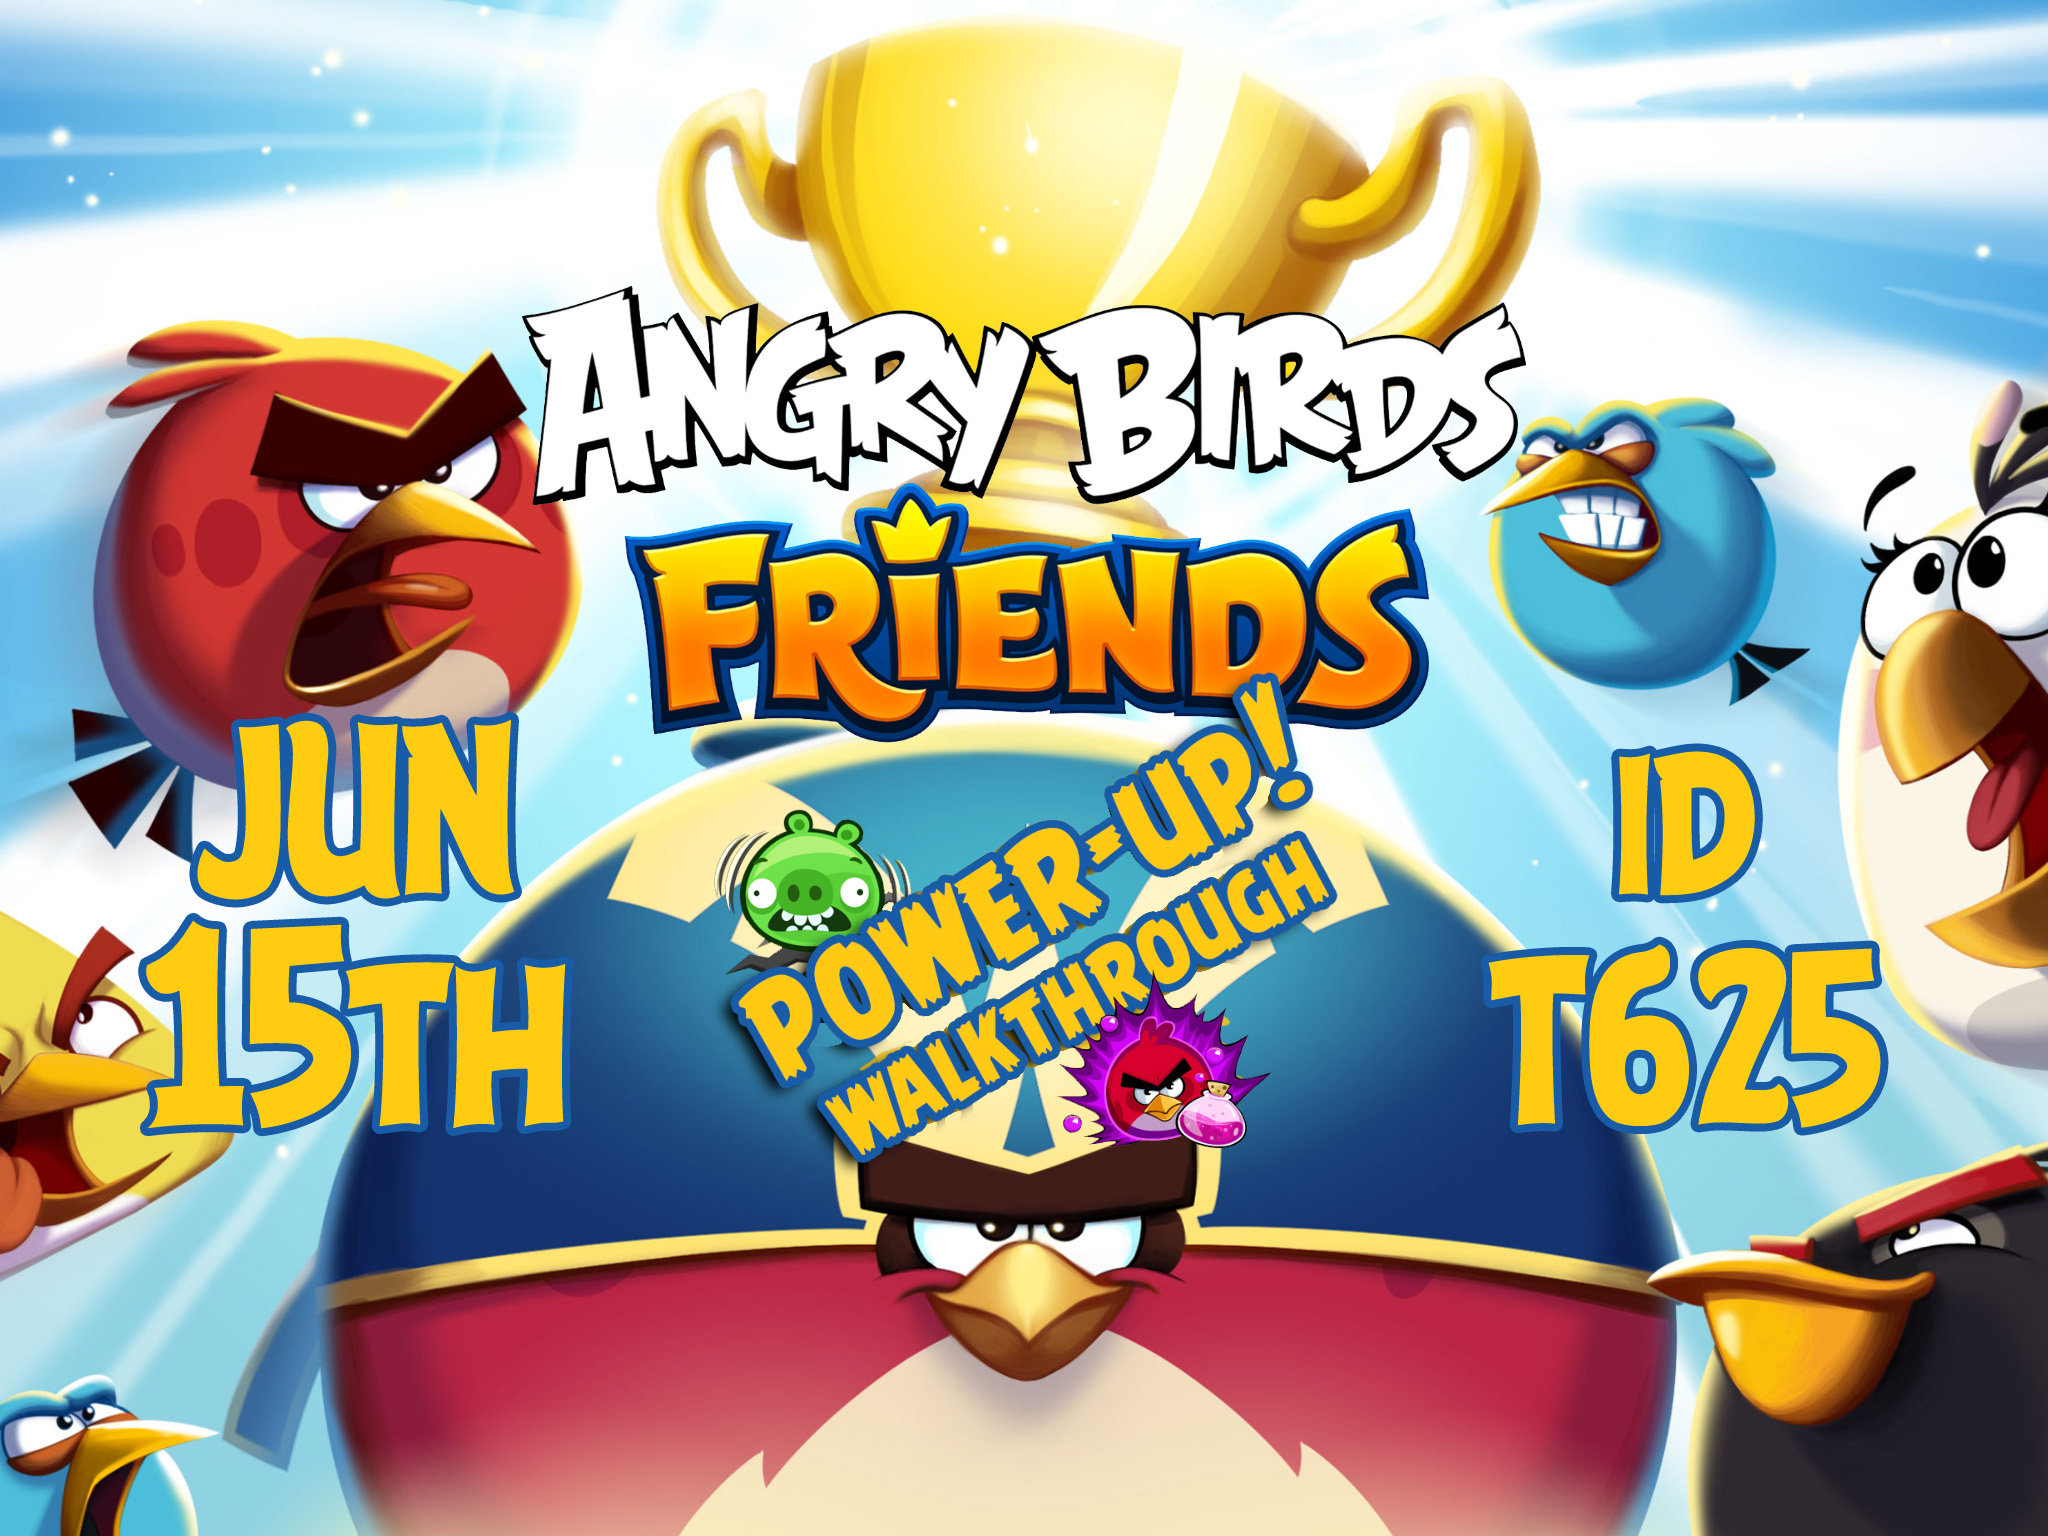 Angry-Birds-Friends-Tournament-T625-Feature-Image-PU